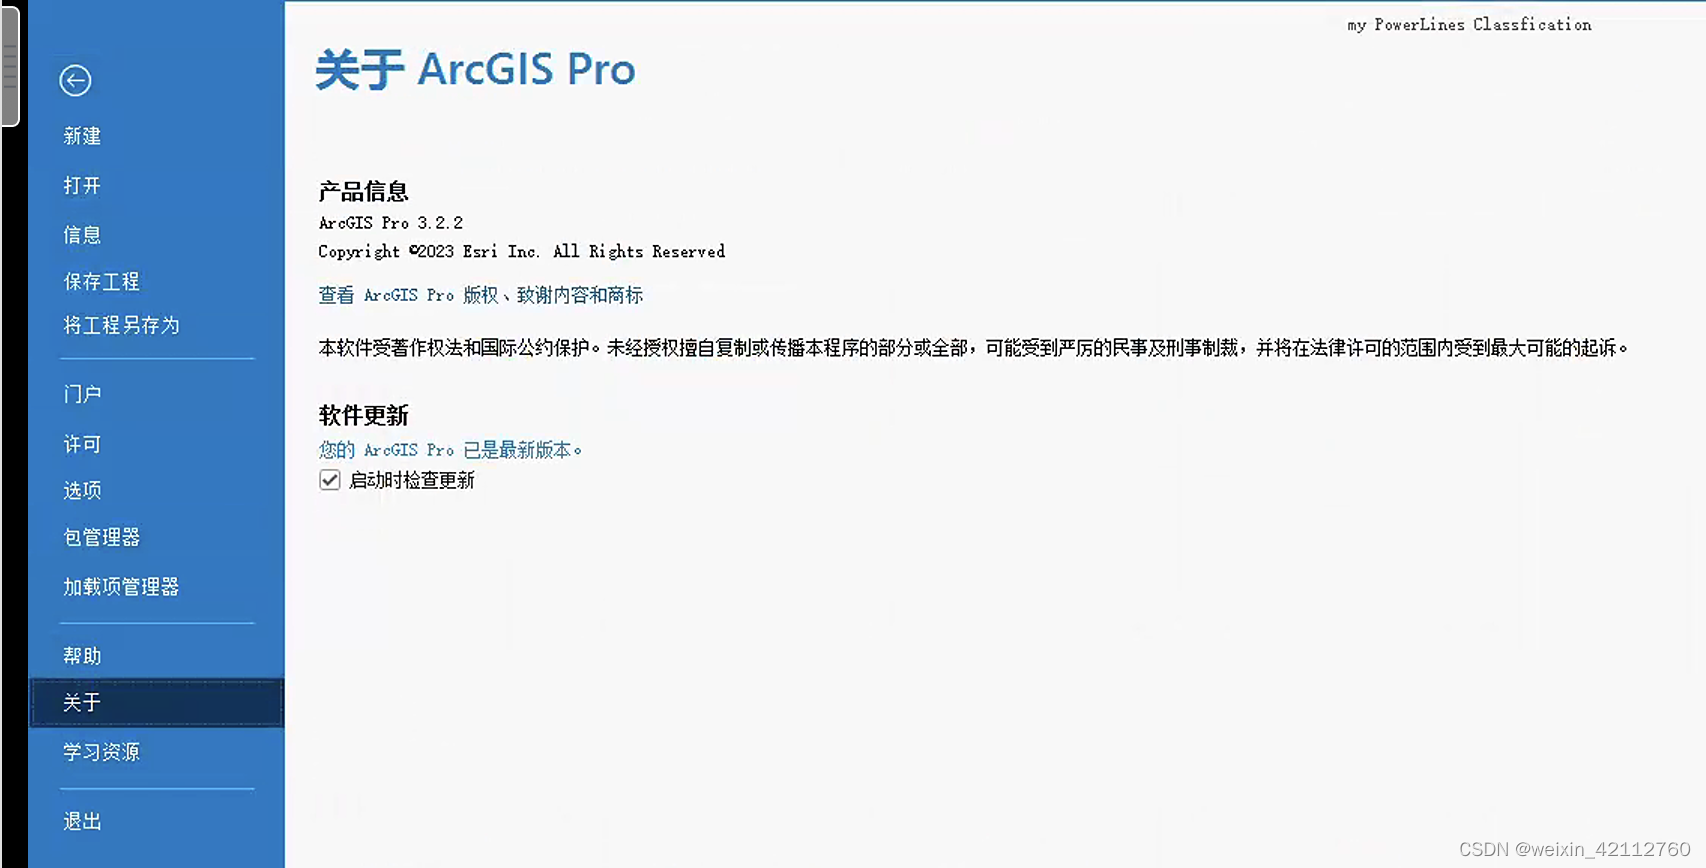 ARCGIS Pro<span style='color:red;'>踩</span><span style='color:red;'>坑</span><span style='color:red;'>及</span><span style='color:red;'>解决</span><span style='color:red;'>方案</span>